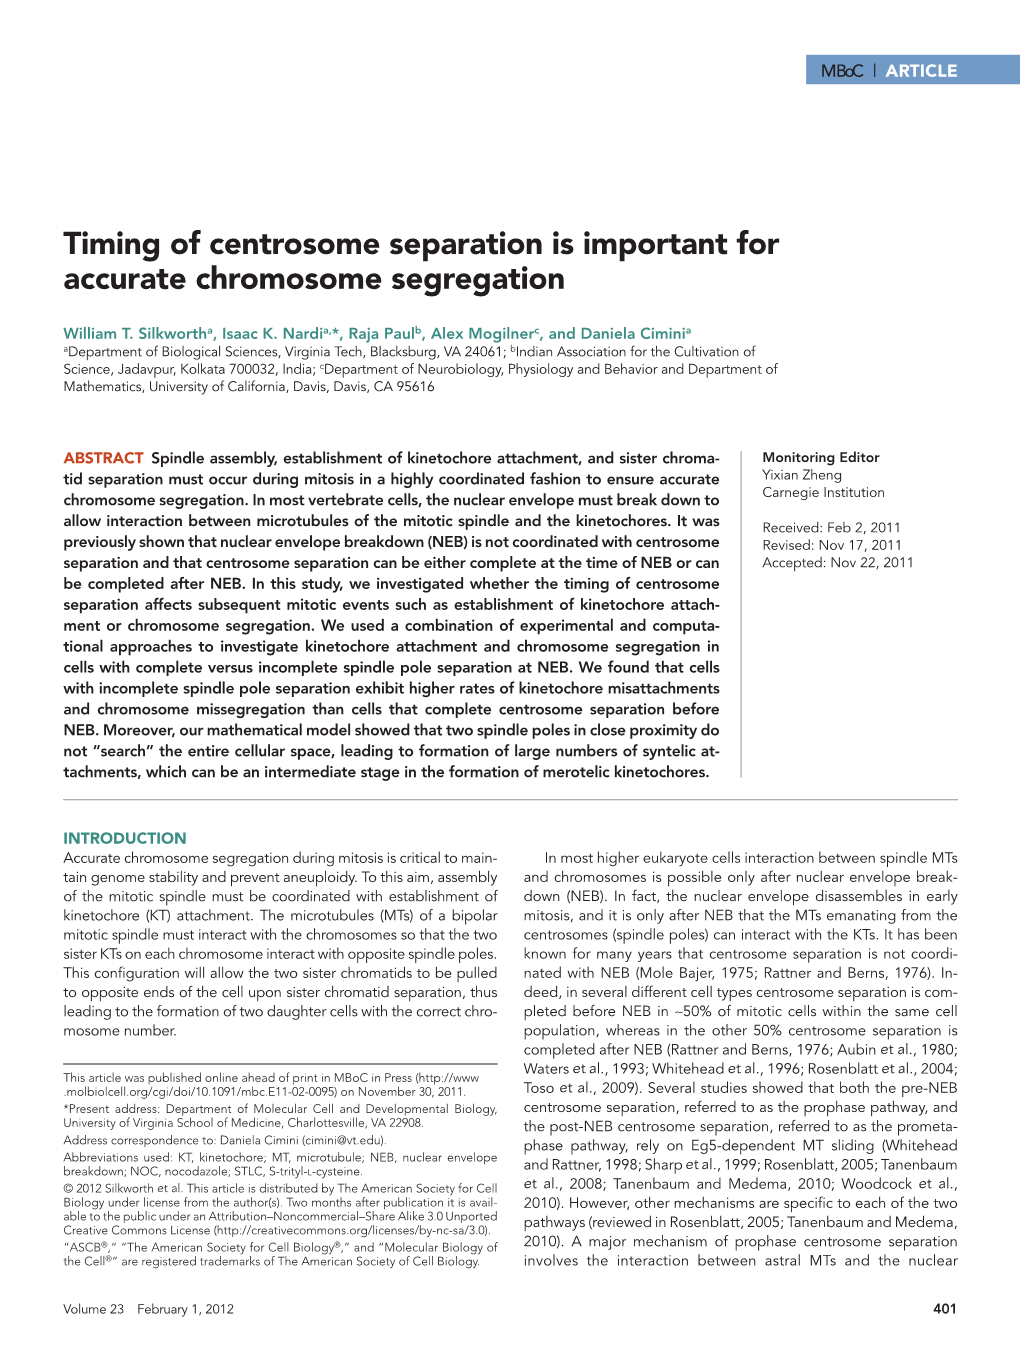 Timing of Centrosome Separation Is Important for Accurate Chromosome Segregation